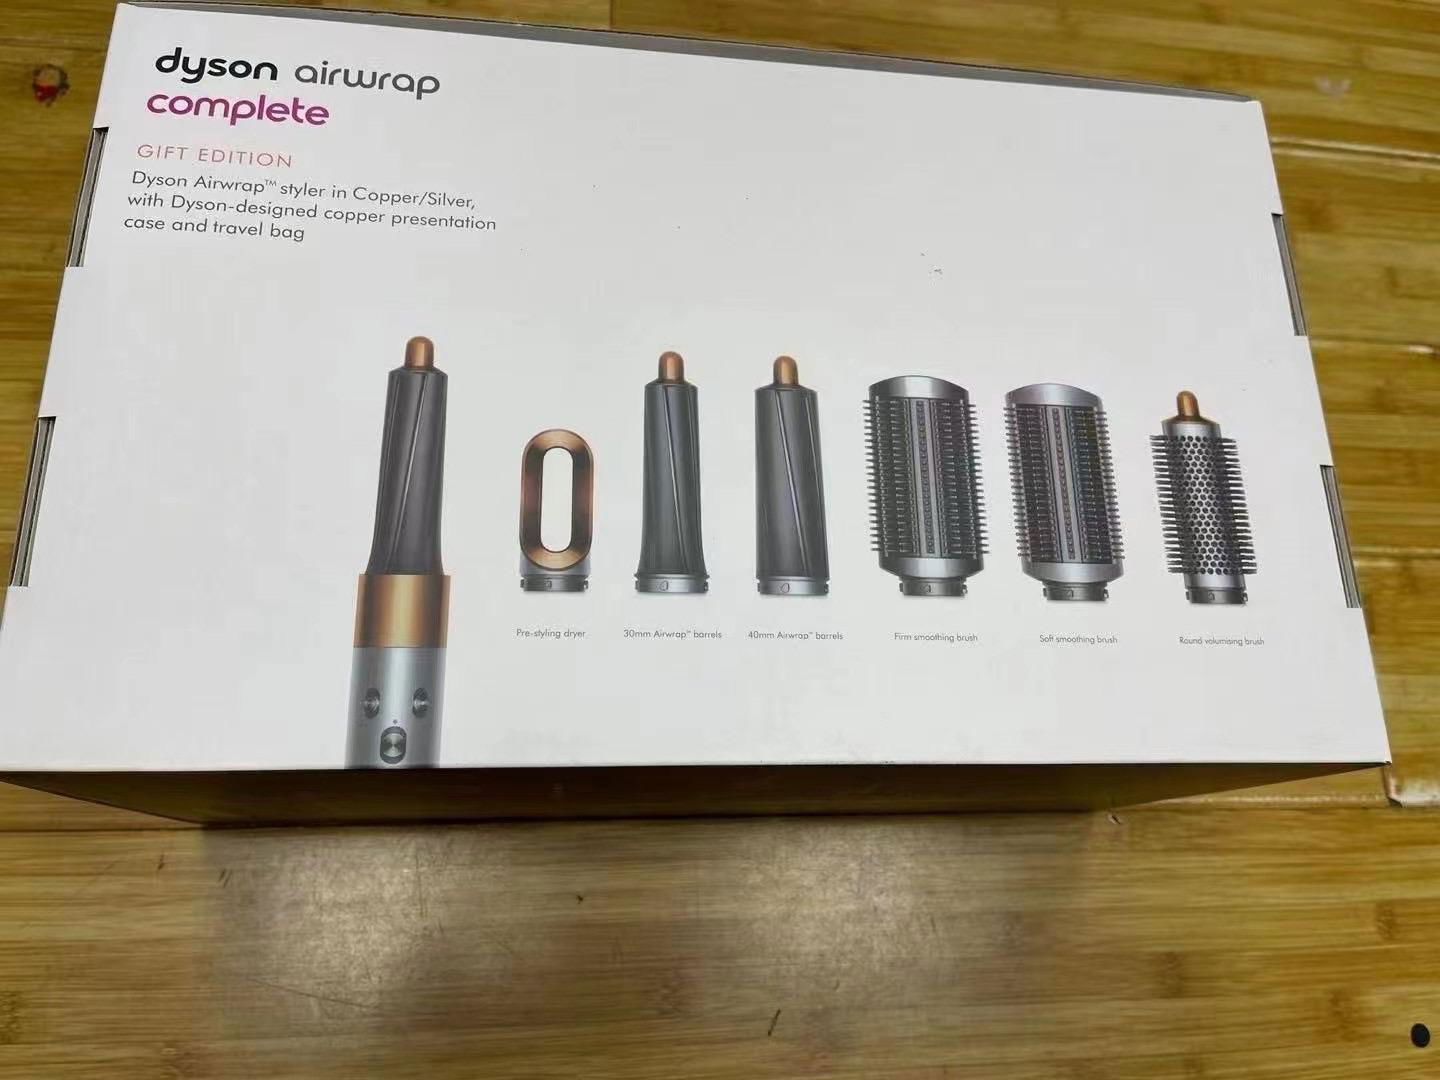 Buy Dyson Airwrap Gift Edition Copper & Sliver Discount Price 3